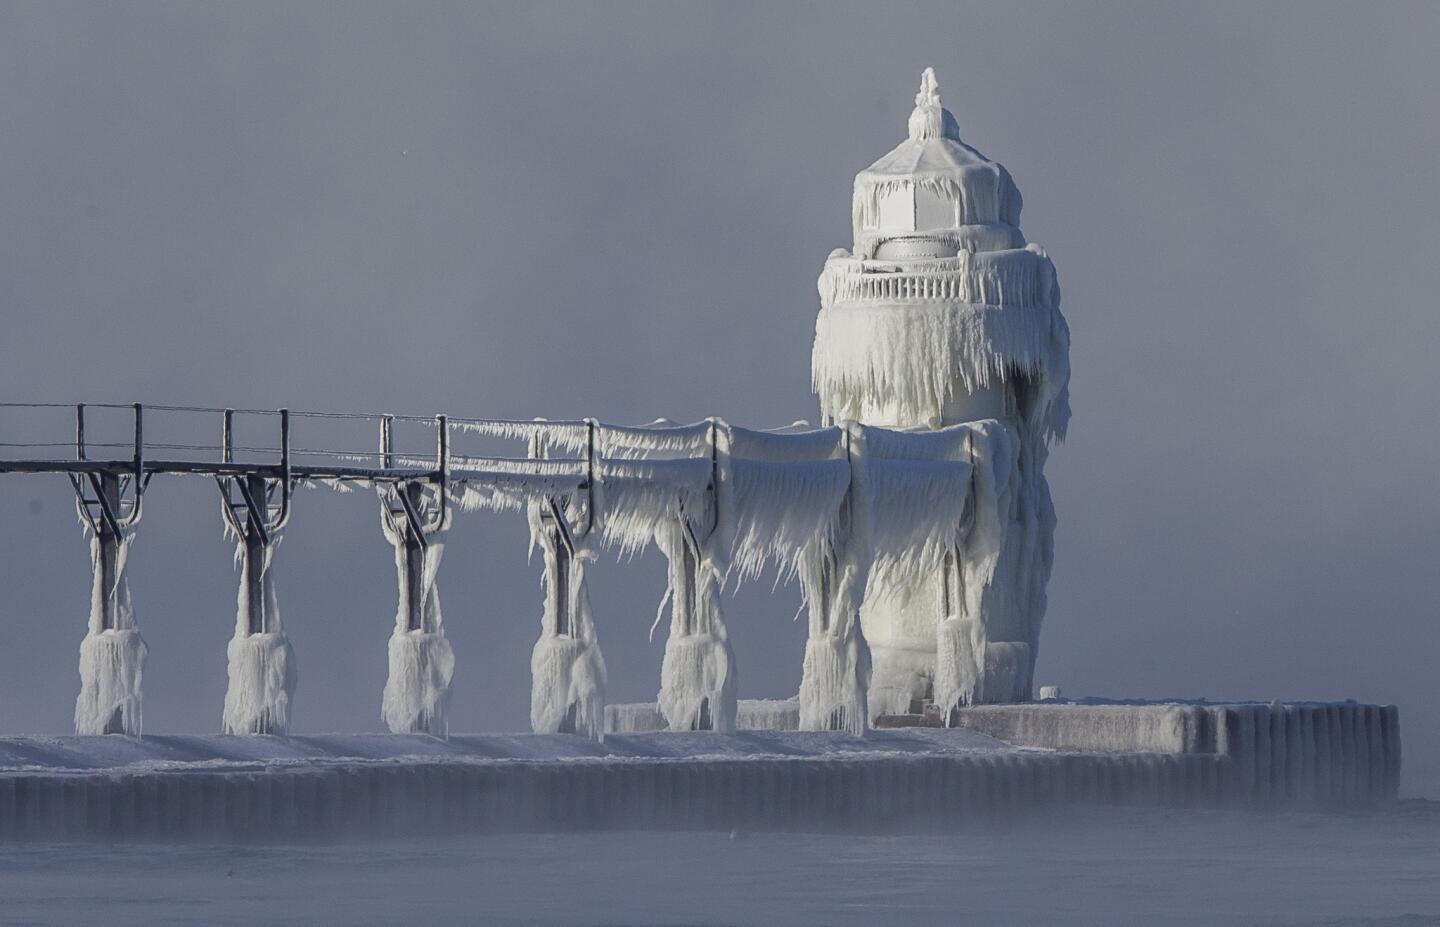 Extreme cold conditions cause ice accretions to cover the St. Joseph lighthouse and pier, on the southeastern shoreline of Lake Michigan.